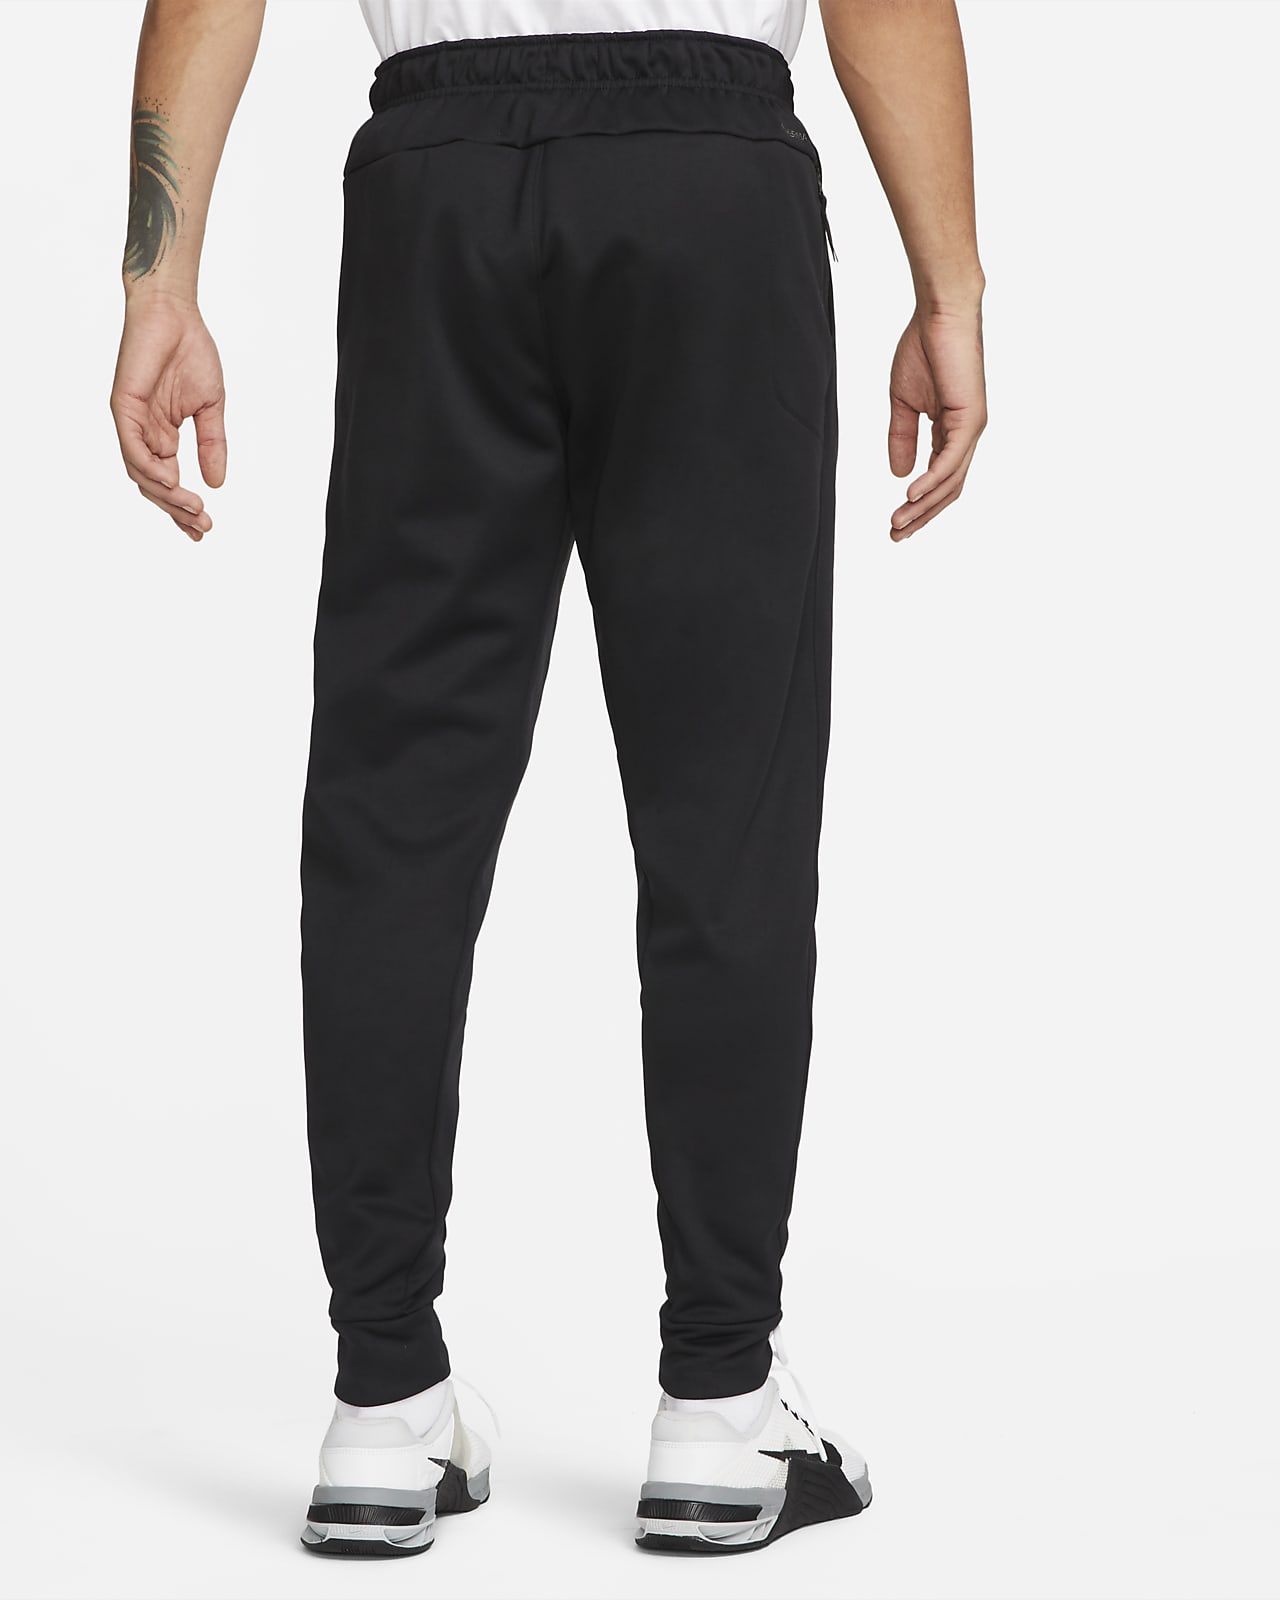 Hommes Therma-FIT Vêtements. Nike FR